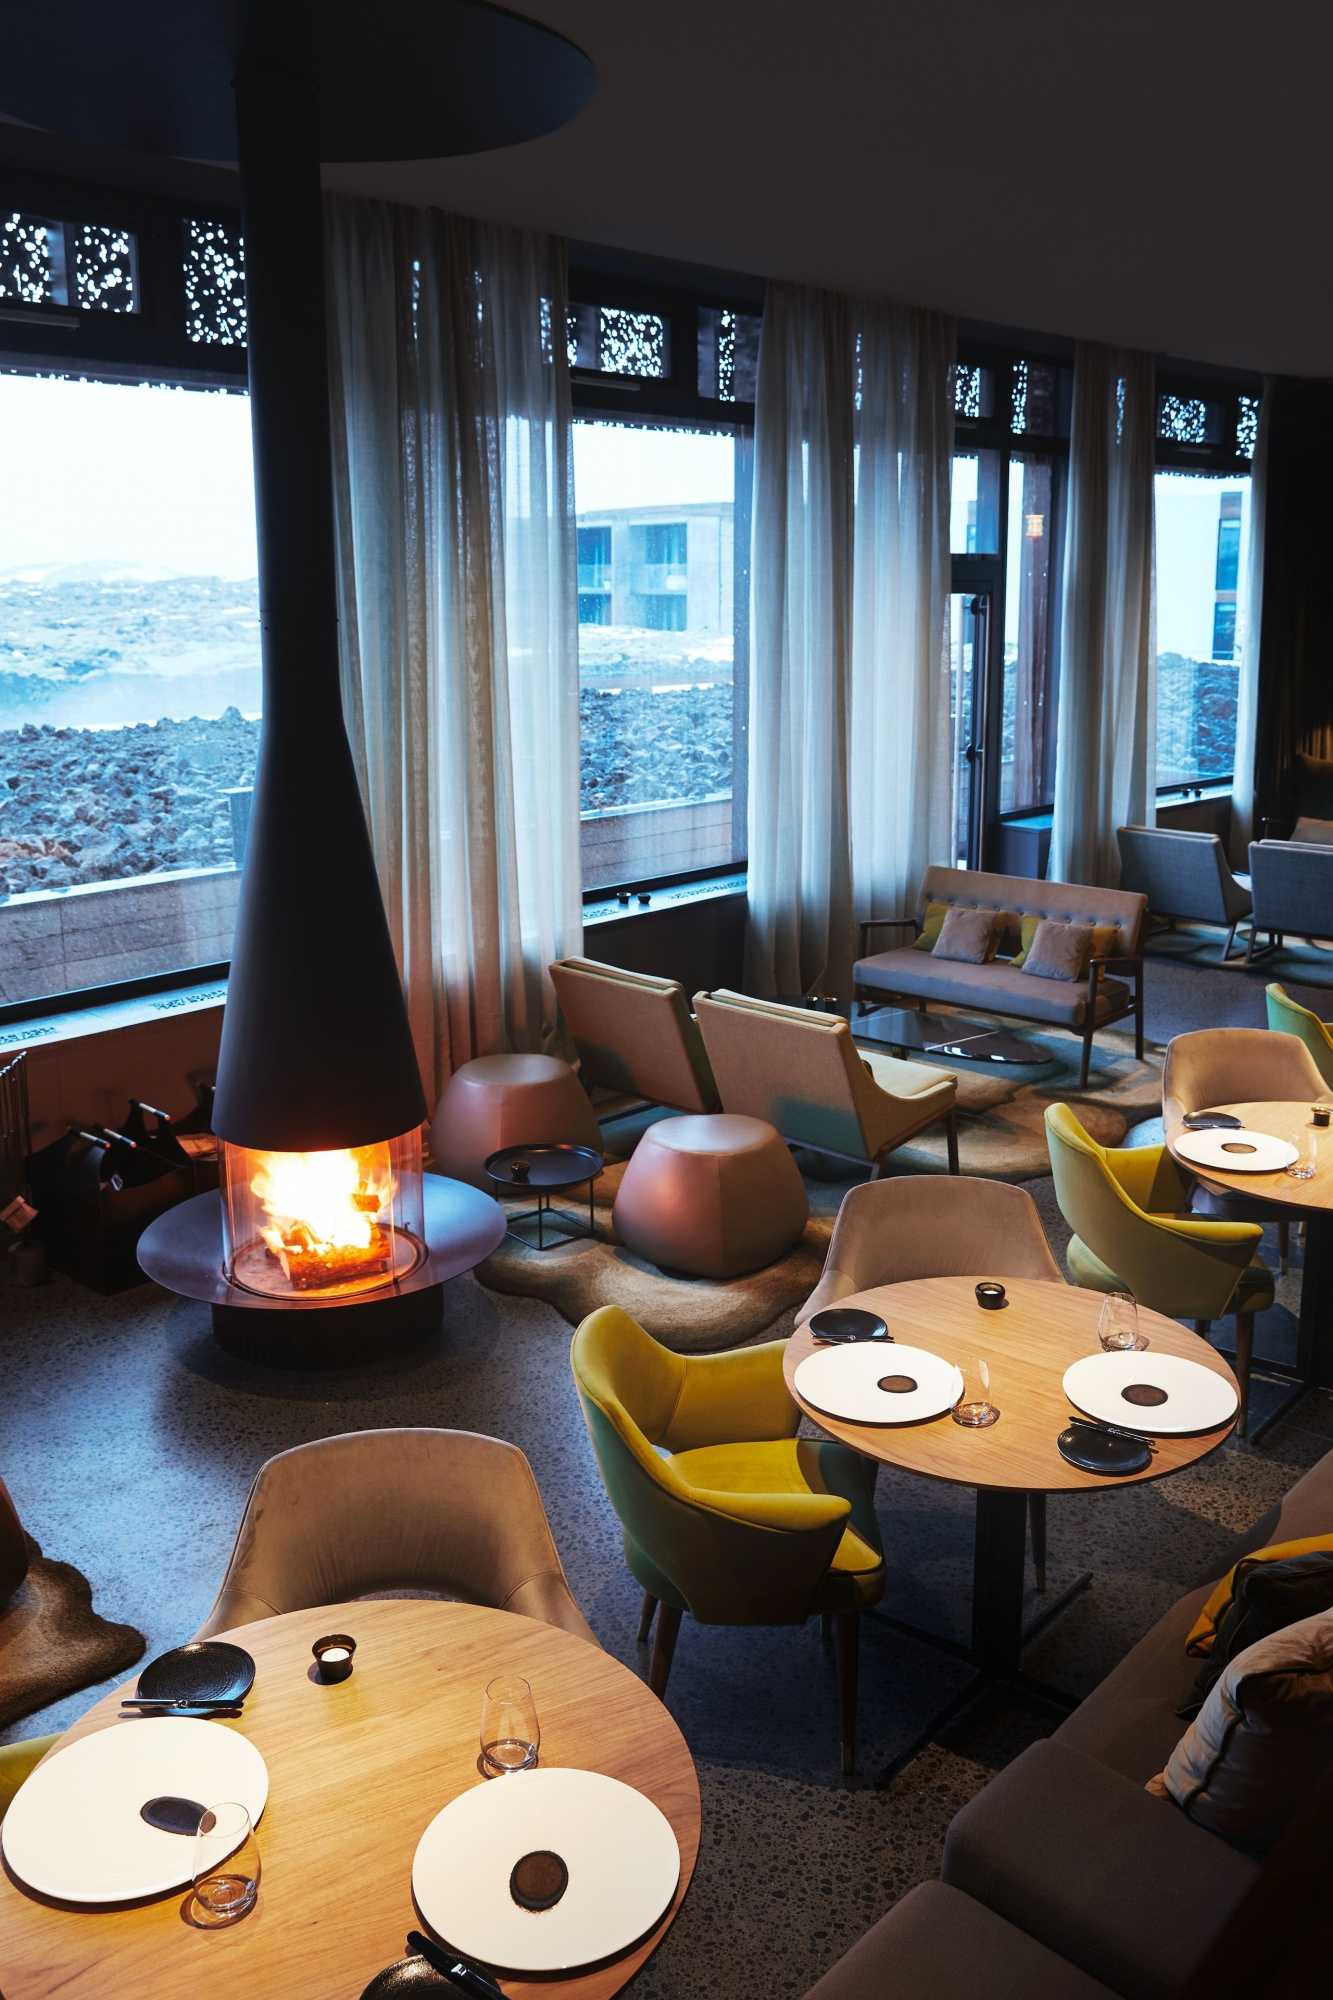 The Retreat at Blue Lagoon Iceland immerses guests in nature